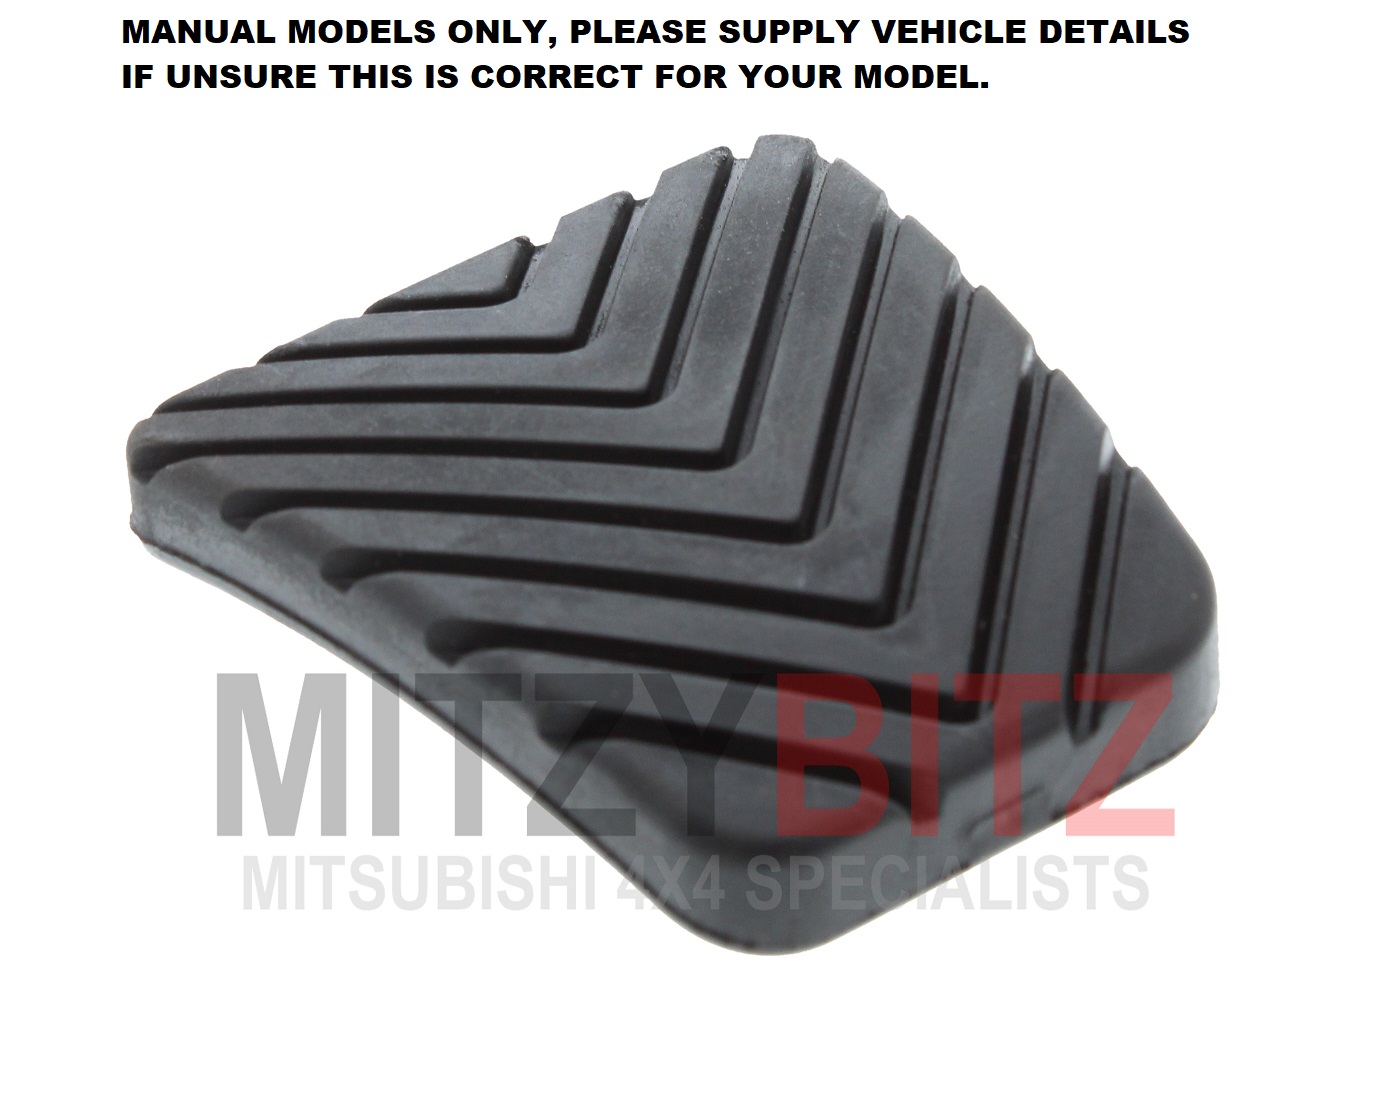 CLUTCH OR BRAKE PEDAL COVER RUBBER PAD MITSUBISHI L200 KL1T Series 5 2.4 DiD